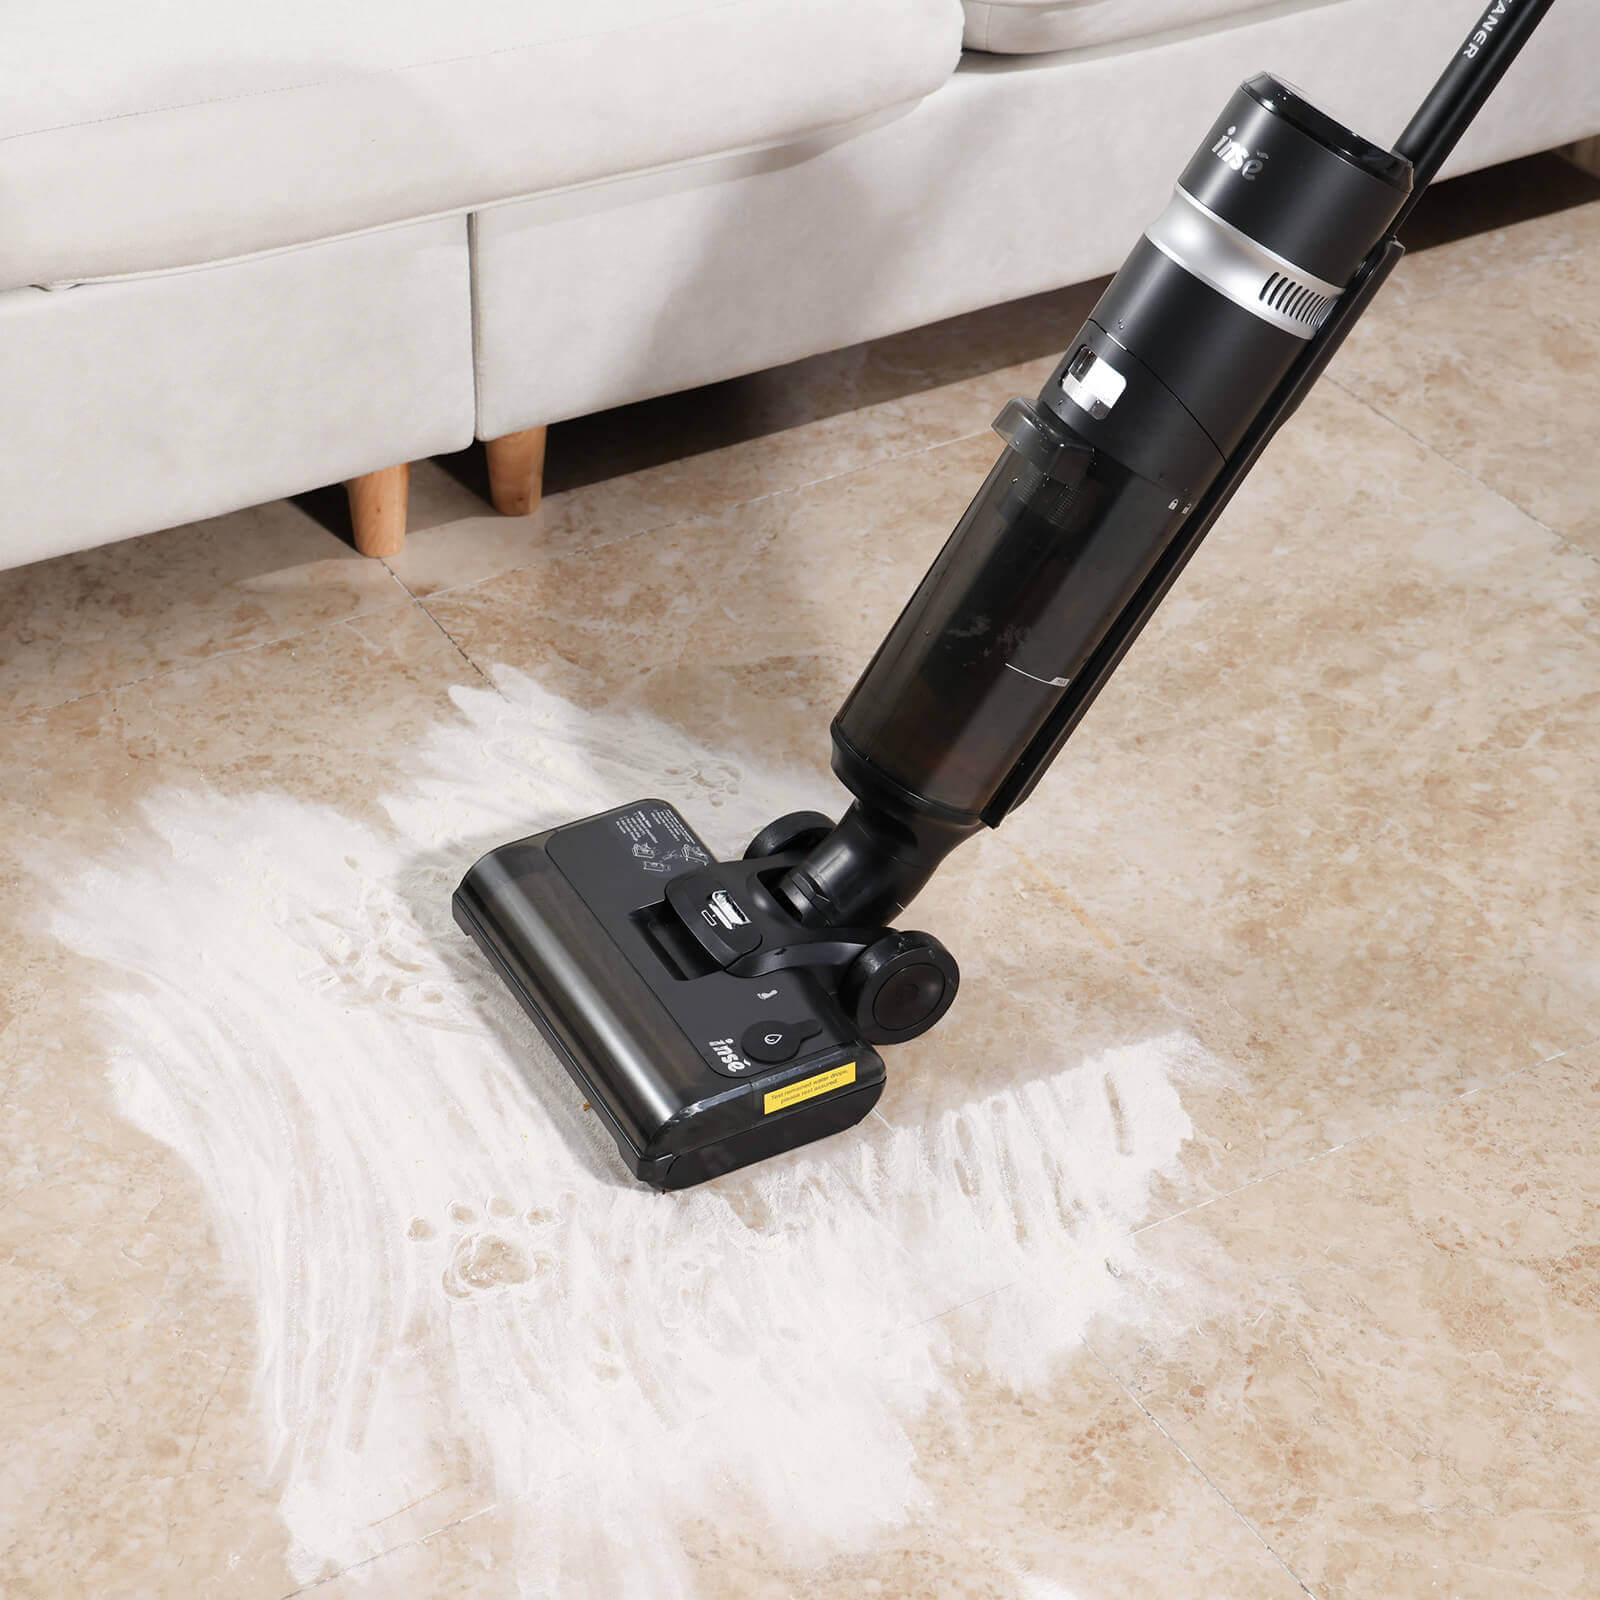 INSE W5 Cordless Wet Dry Vacuum Cleaner clean flour-inselife.com